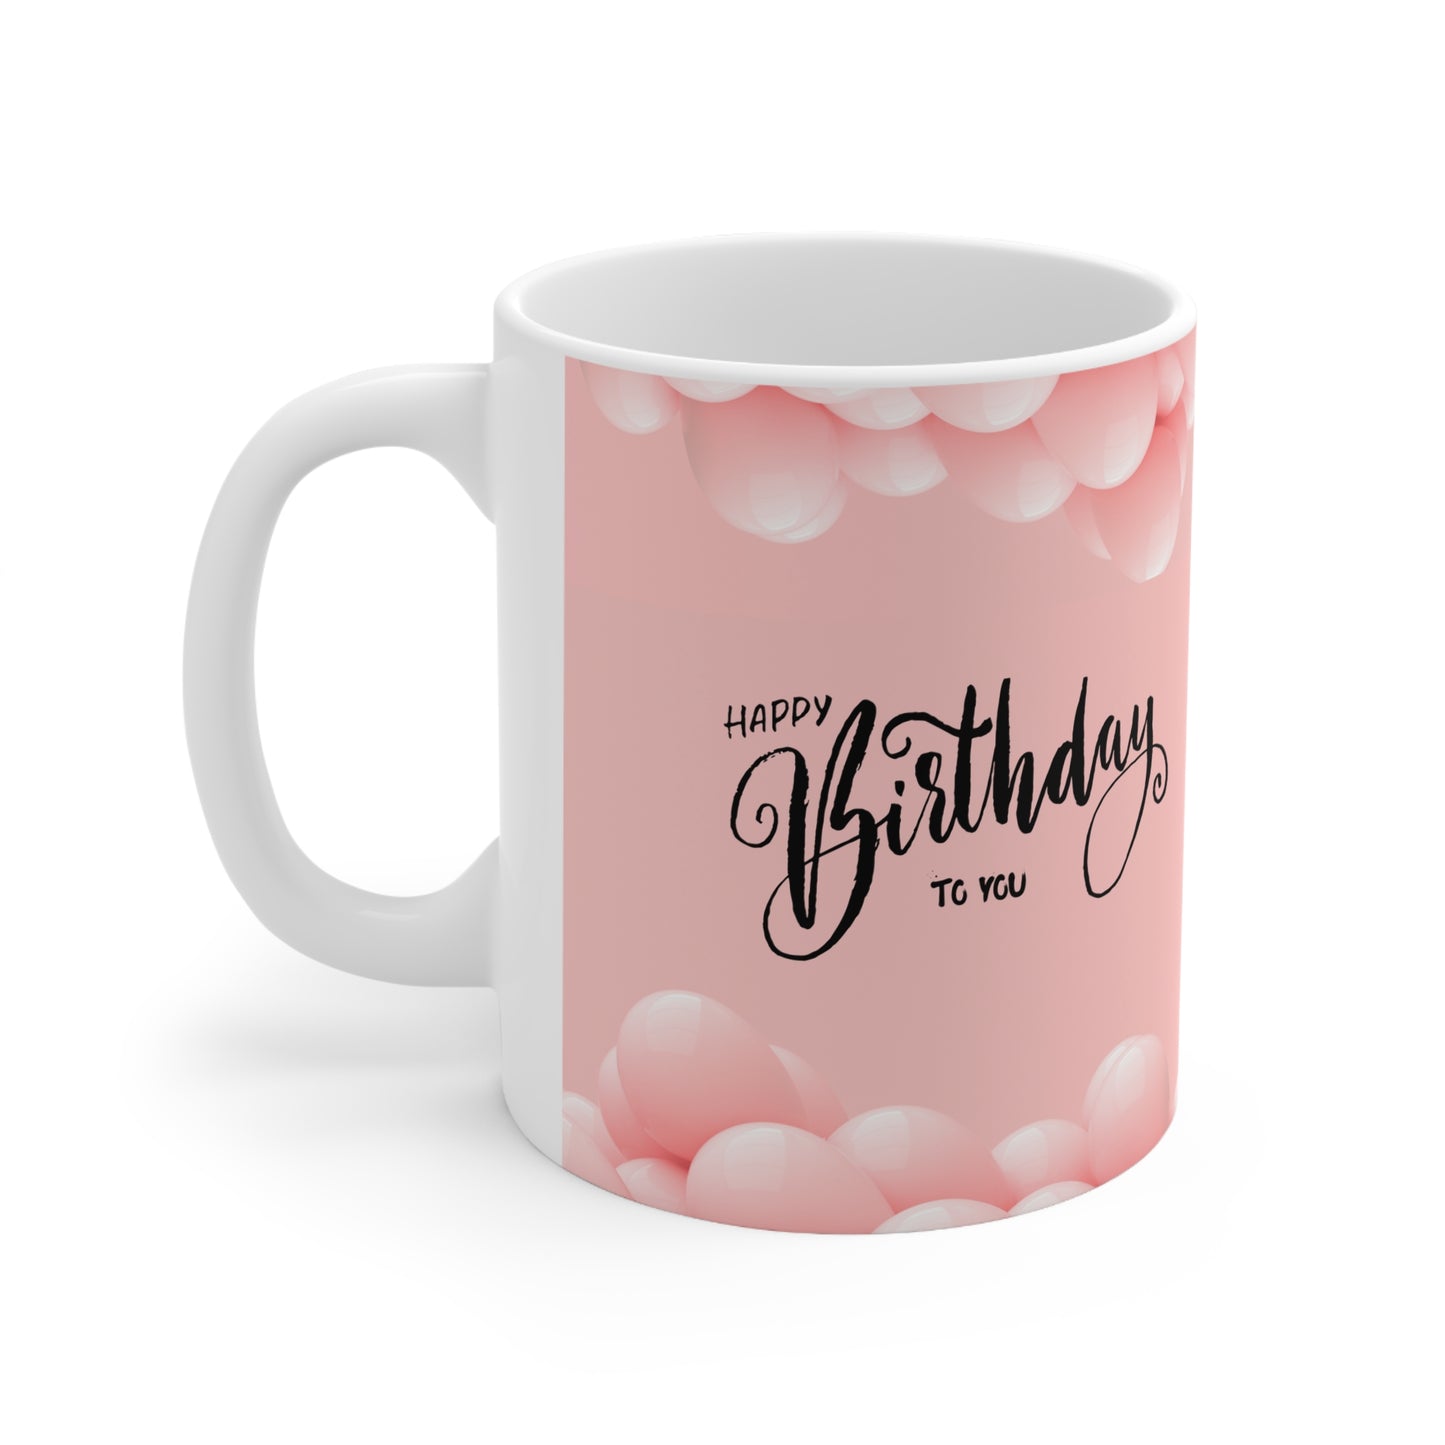 Happy Birthday To You Mugs for Her, Pink